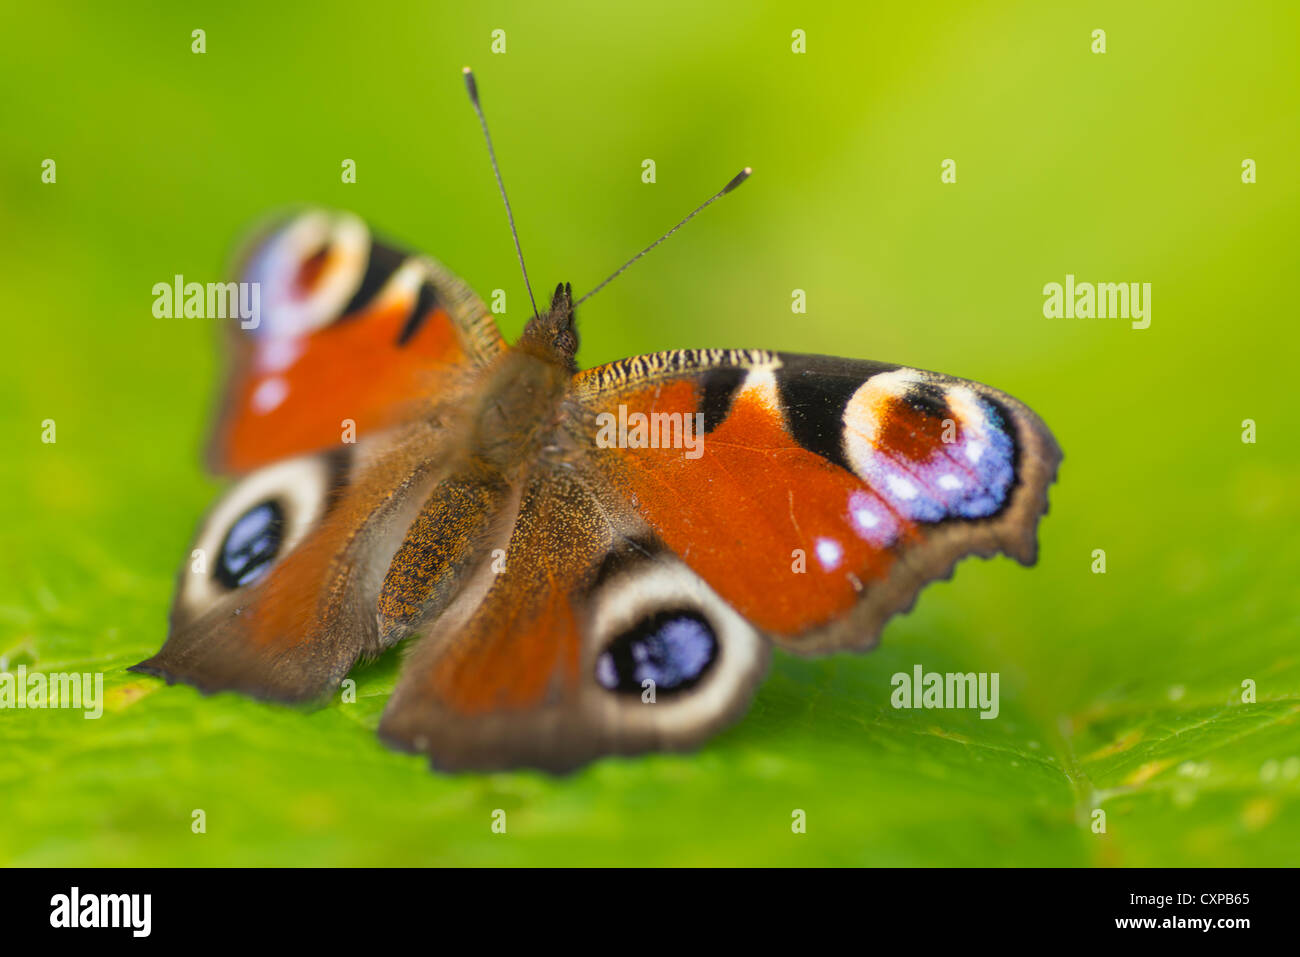 Close up of a European Peacock Butterfly Banque D'Images